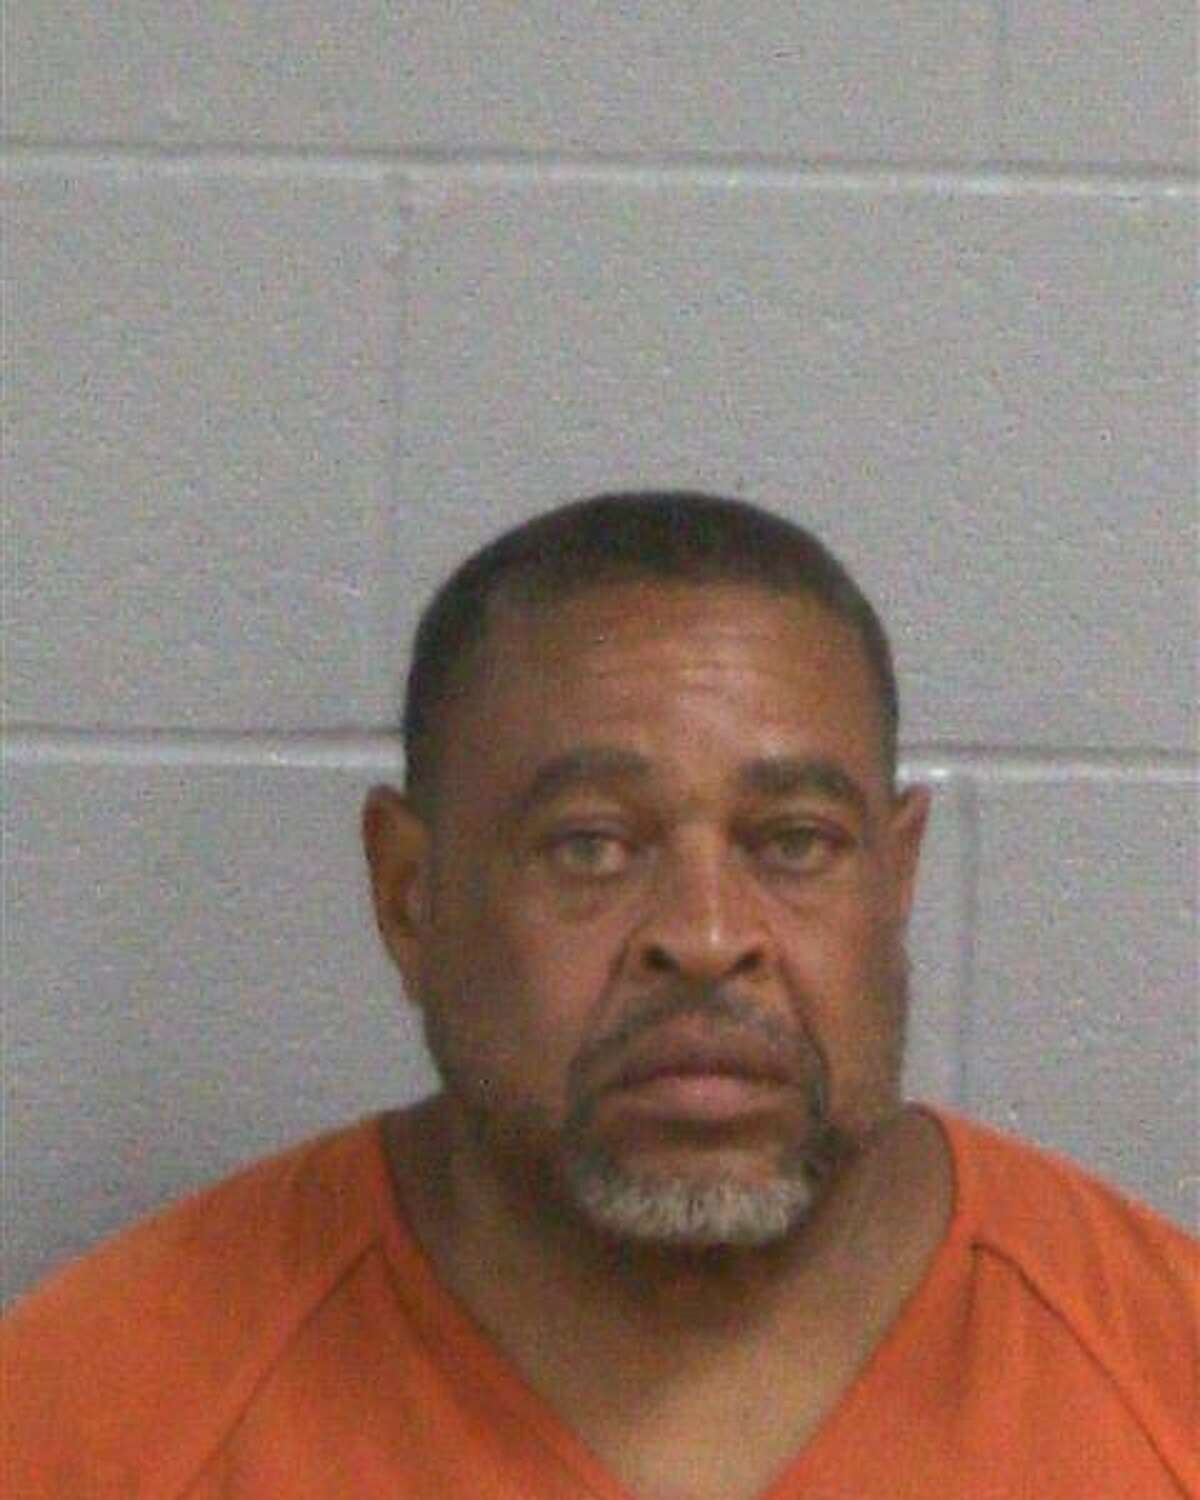 Willie James Kelley, 64, was arrested after a Midland police investigation determined he failed to provide help for an injured German Shepherd, according to court documents. 